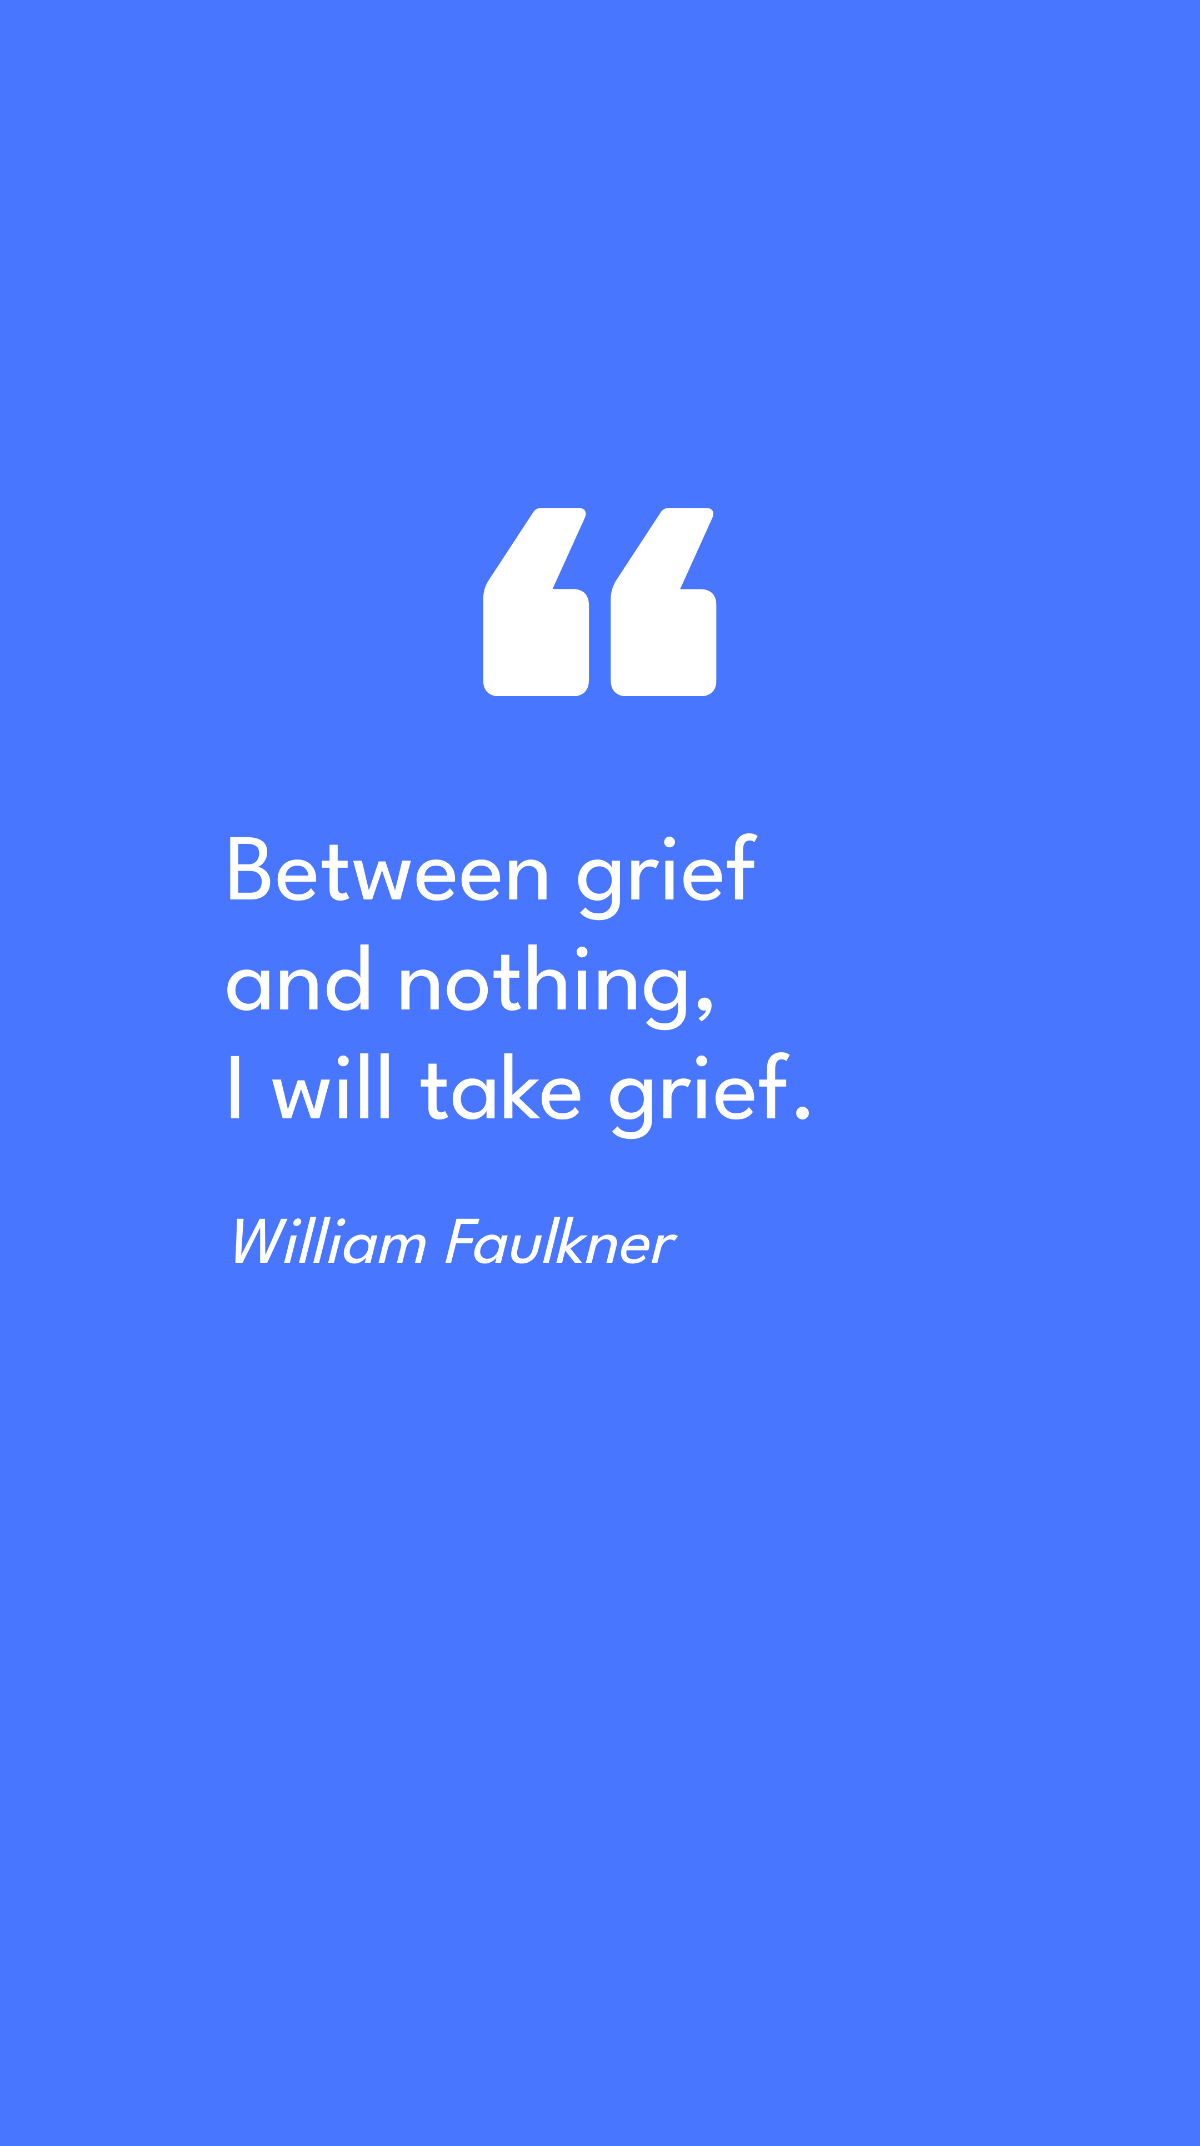 William Faulkner - Between grief and nothing, I will take grief.